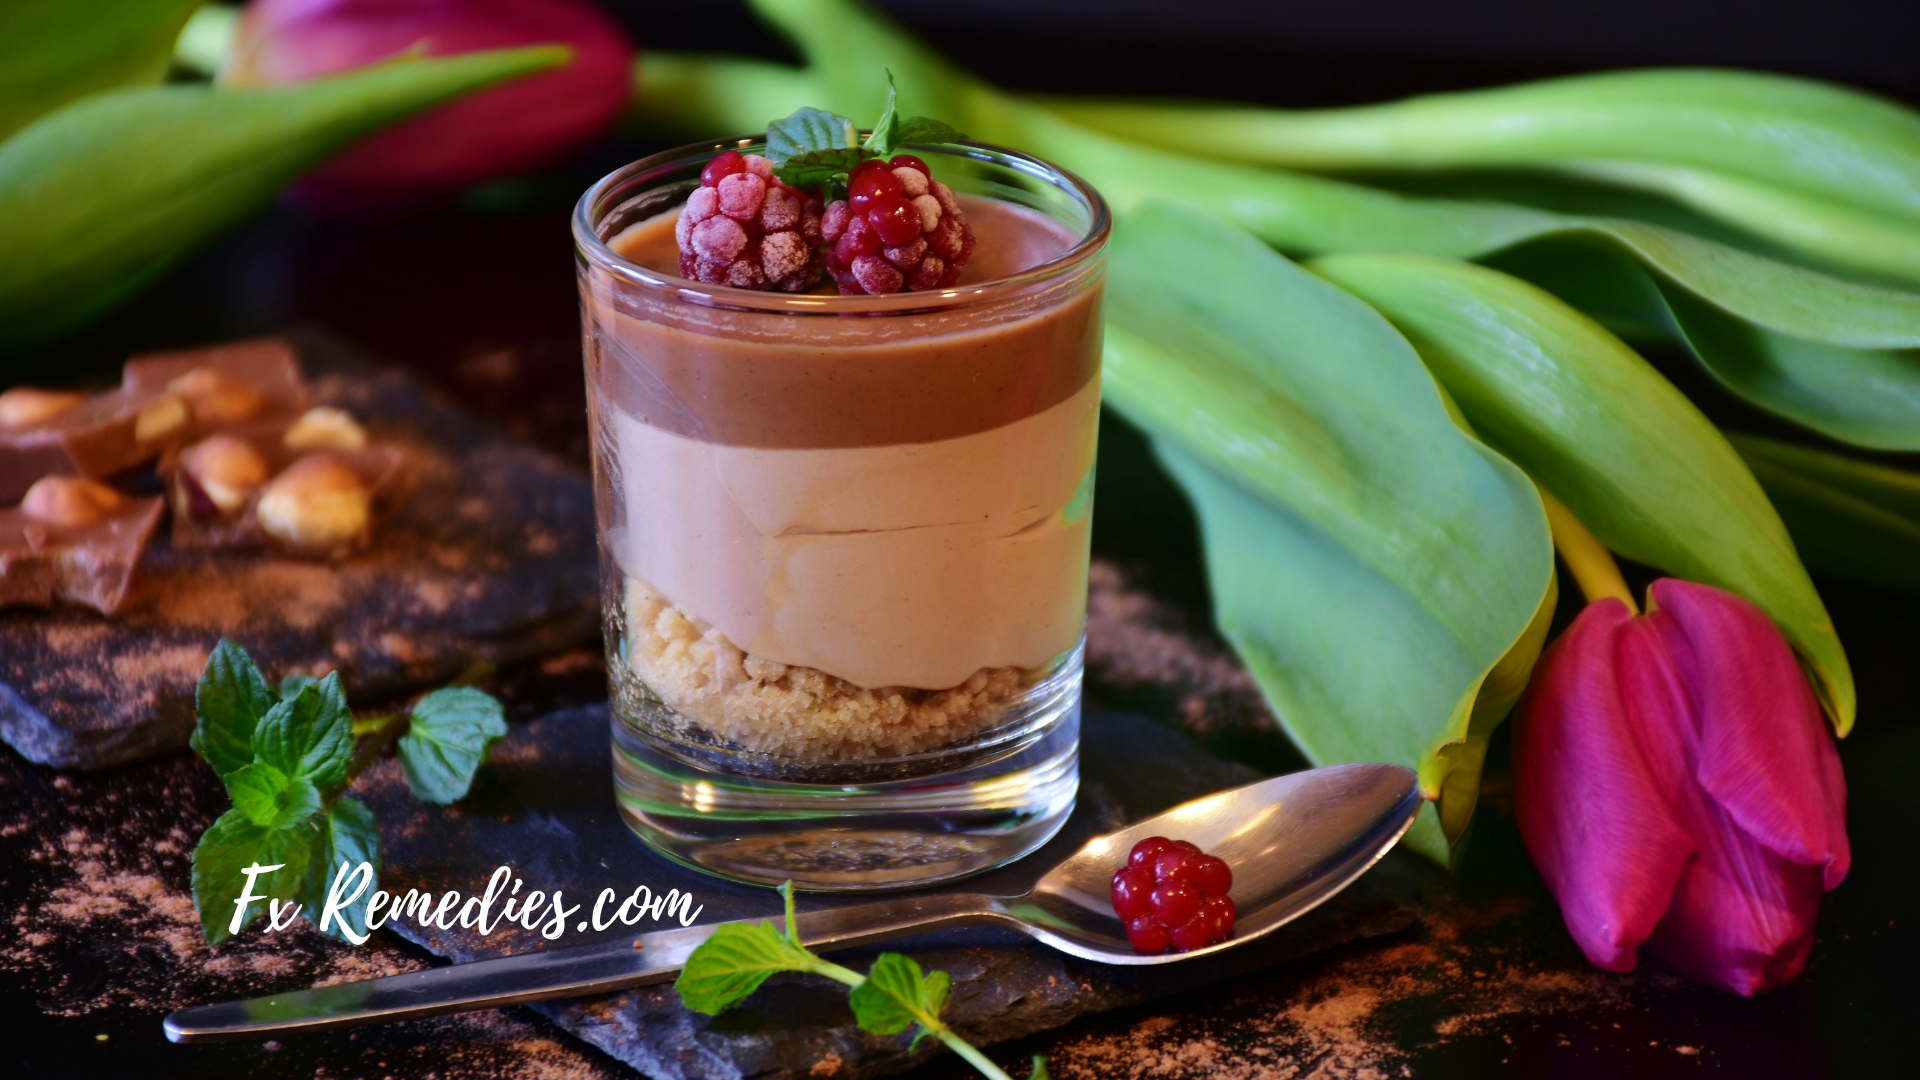 Clean eating desserts may be just what you need after a satisfying meal to be able to have something sweet, yet still stick to your healthy eating goals.